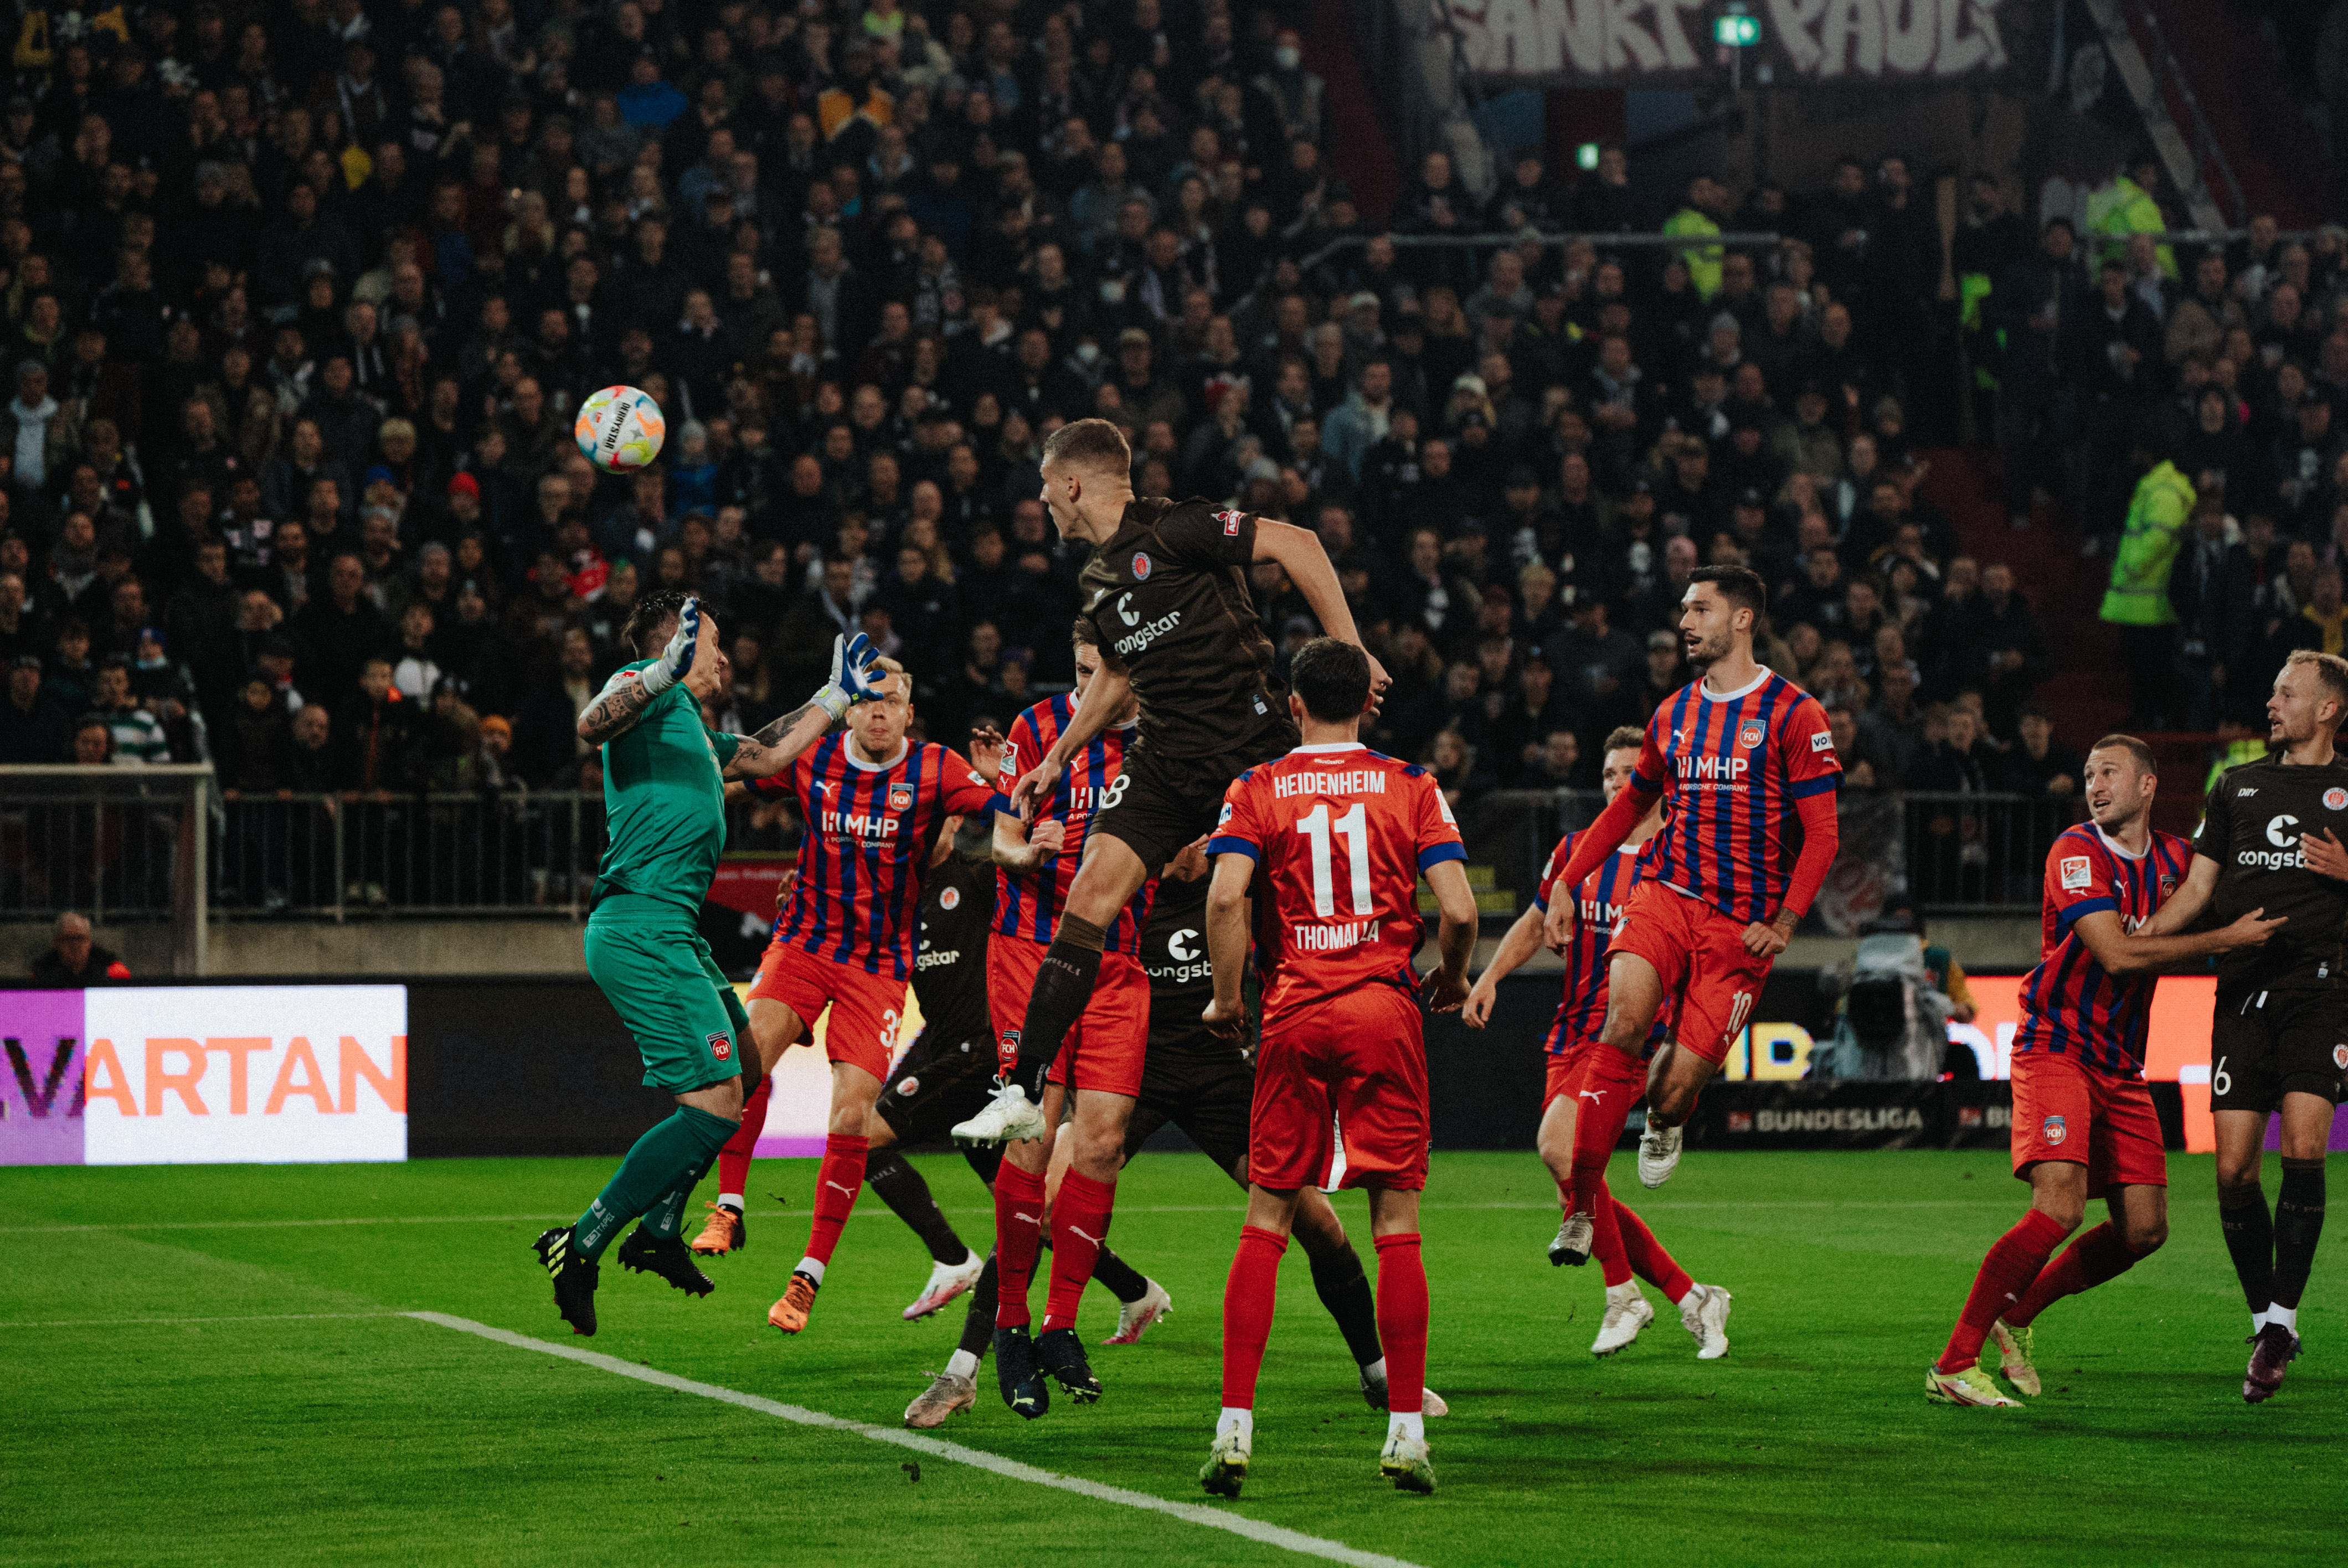 The 13th minute: Jakov Medić climbs highest to meet a corner but directs his header wide of the right-hand post.